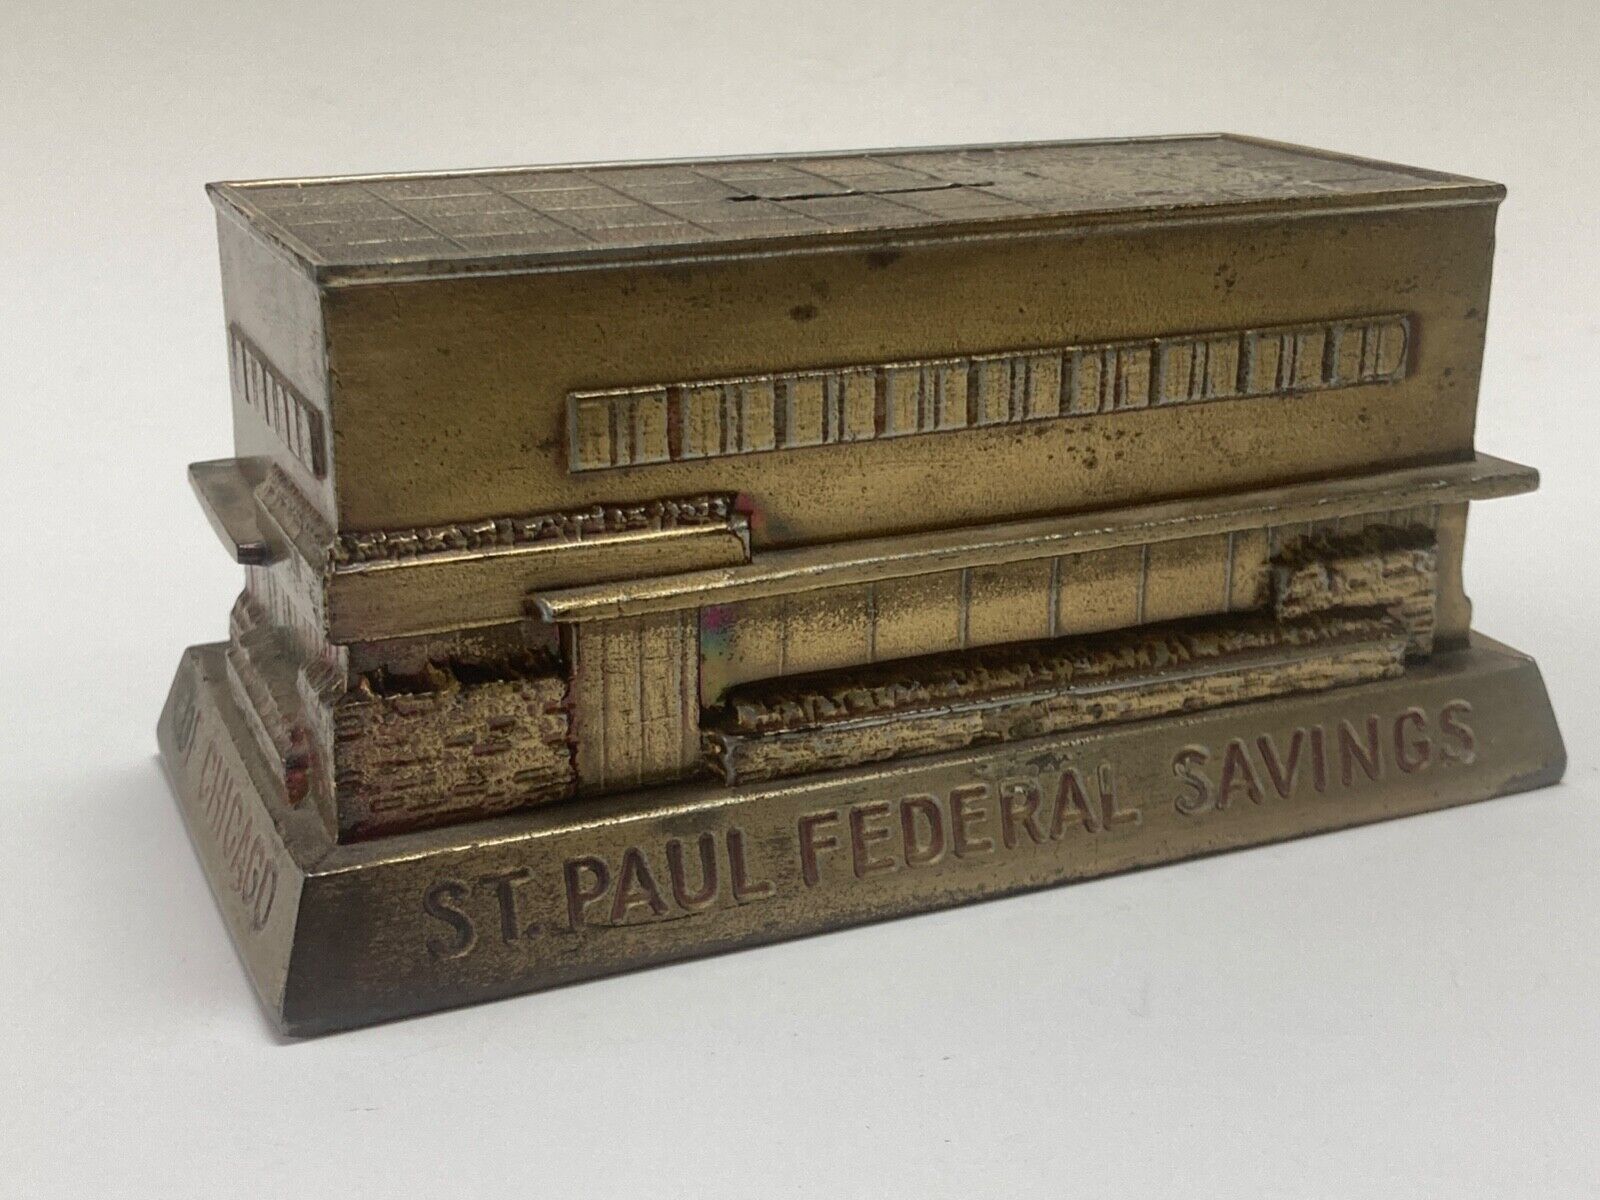 Vintage mid-century Banthrico Bank St. Paul Federal Savings of Chicago